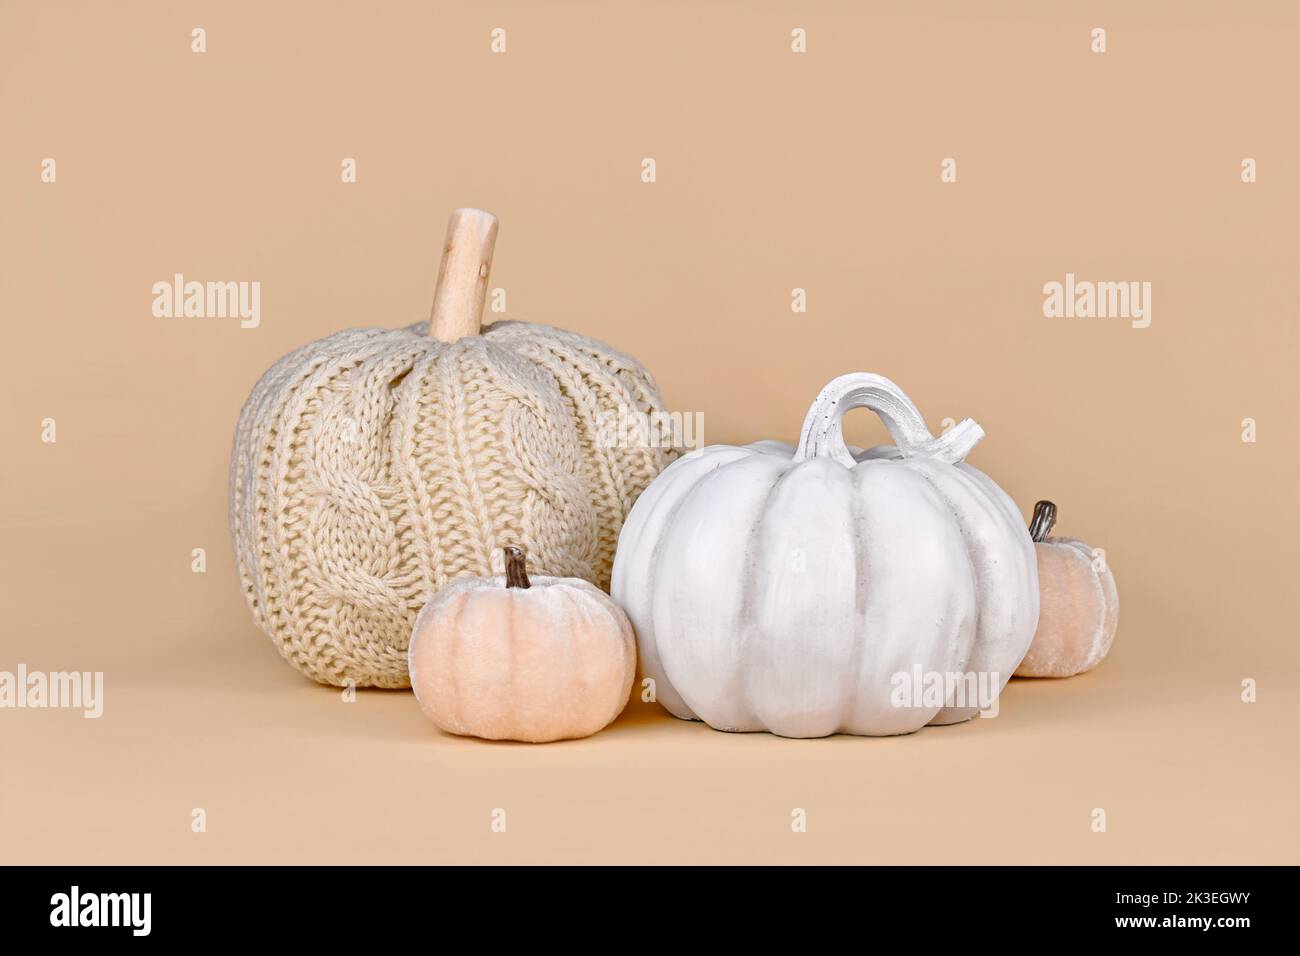 Autumn decoration with boho style knitted beige pumpkin and gray stone pumpkin Stock Photo